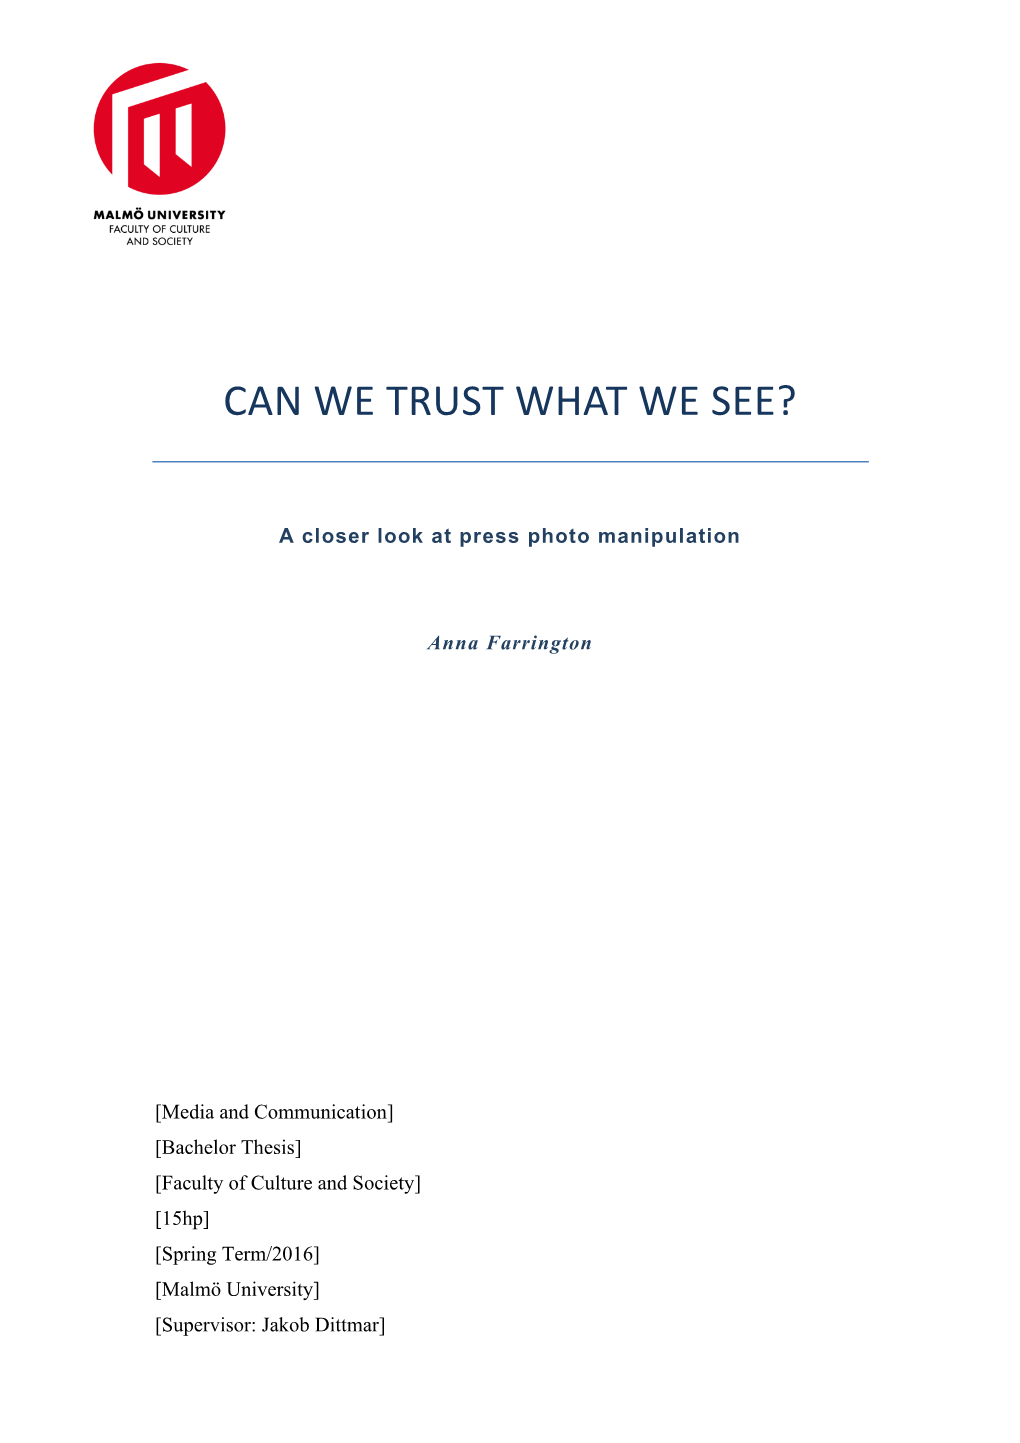 Can We Trust What We See?